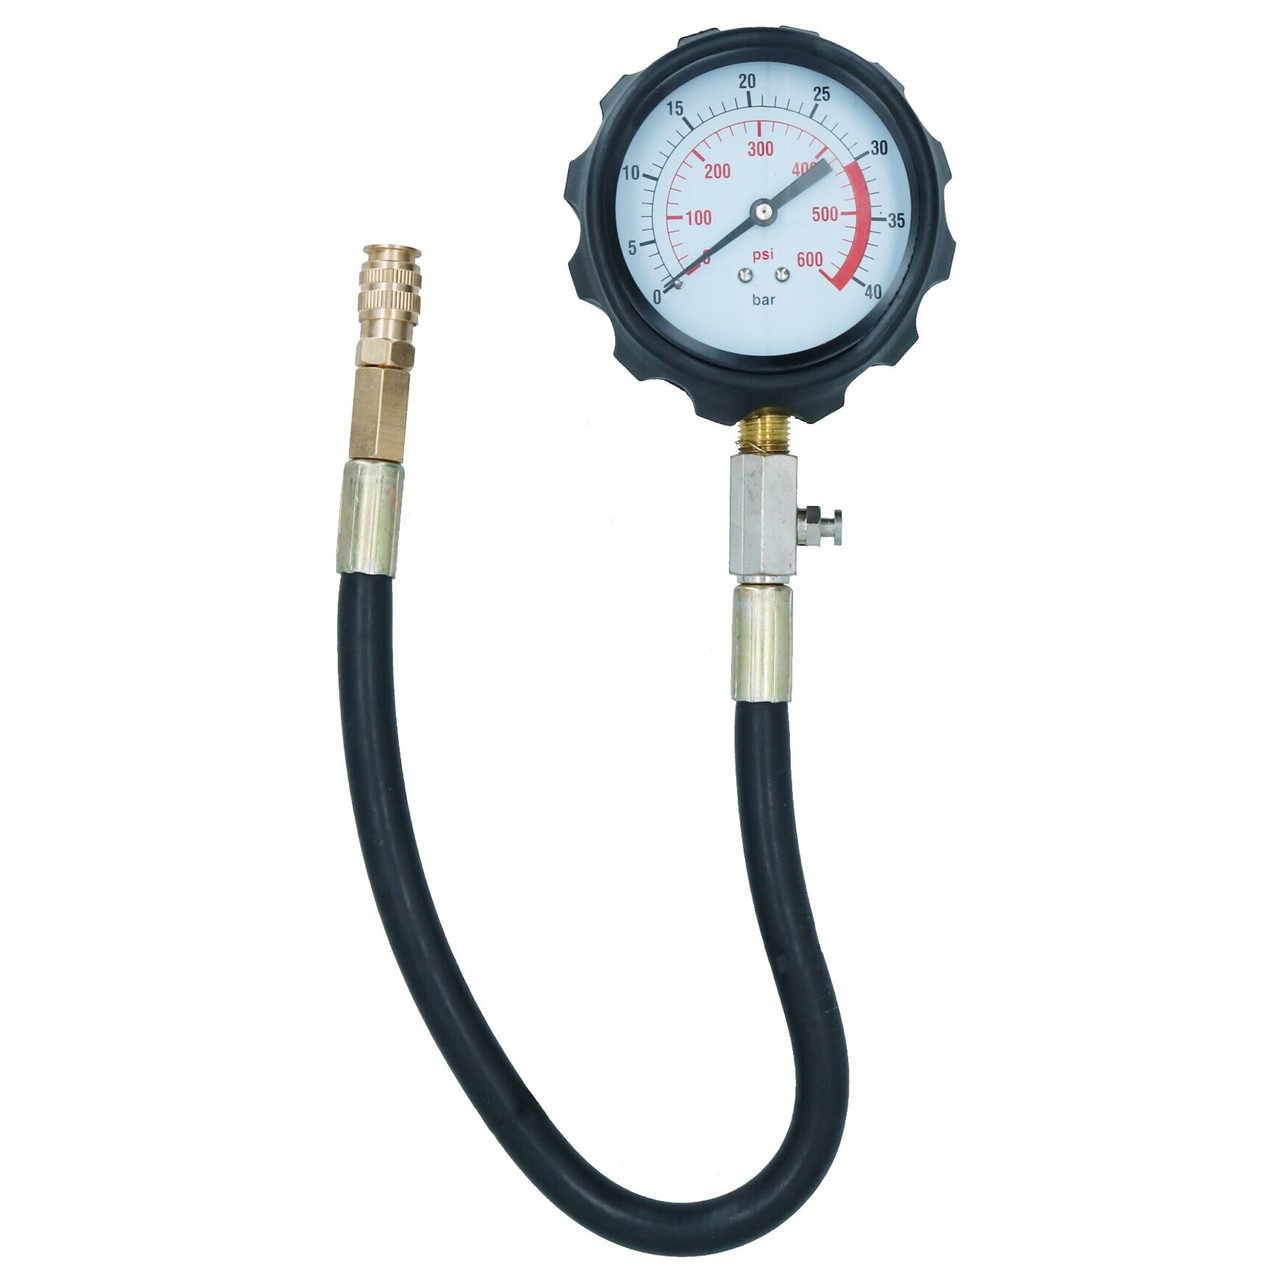 Replacement Gauge For Compression Testers on Diesel Petrol Engines 0 – 600 PSI